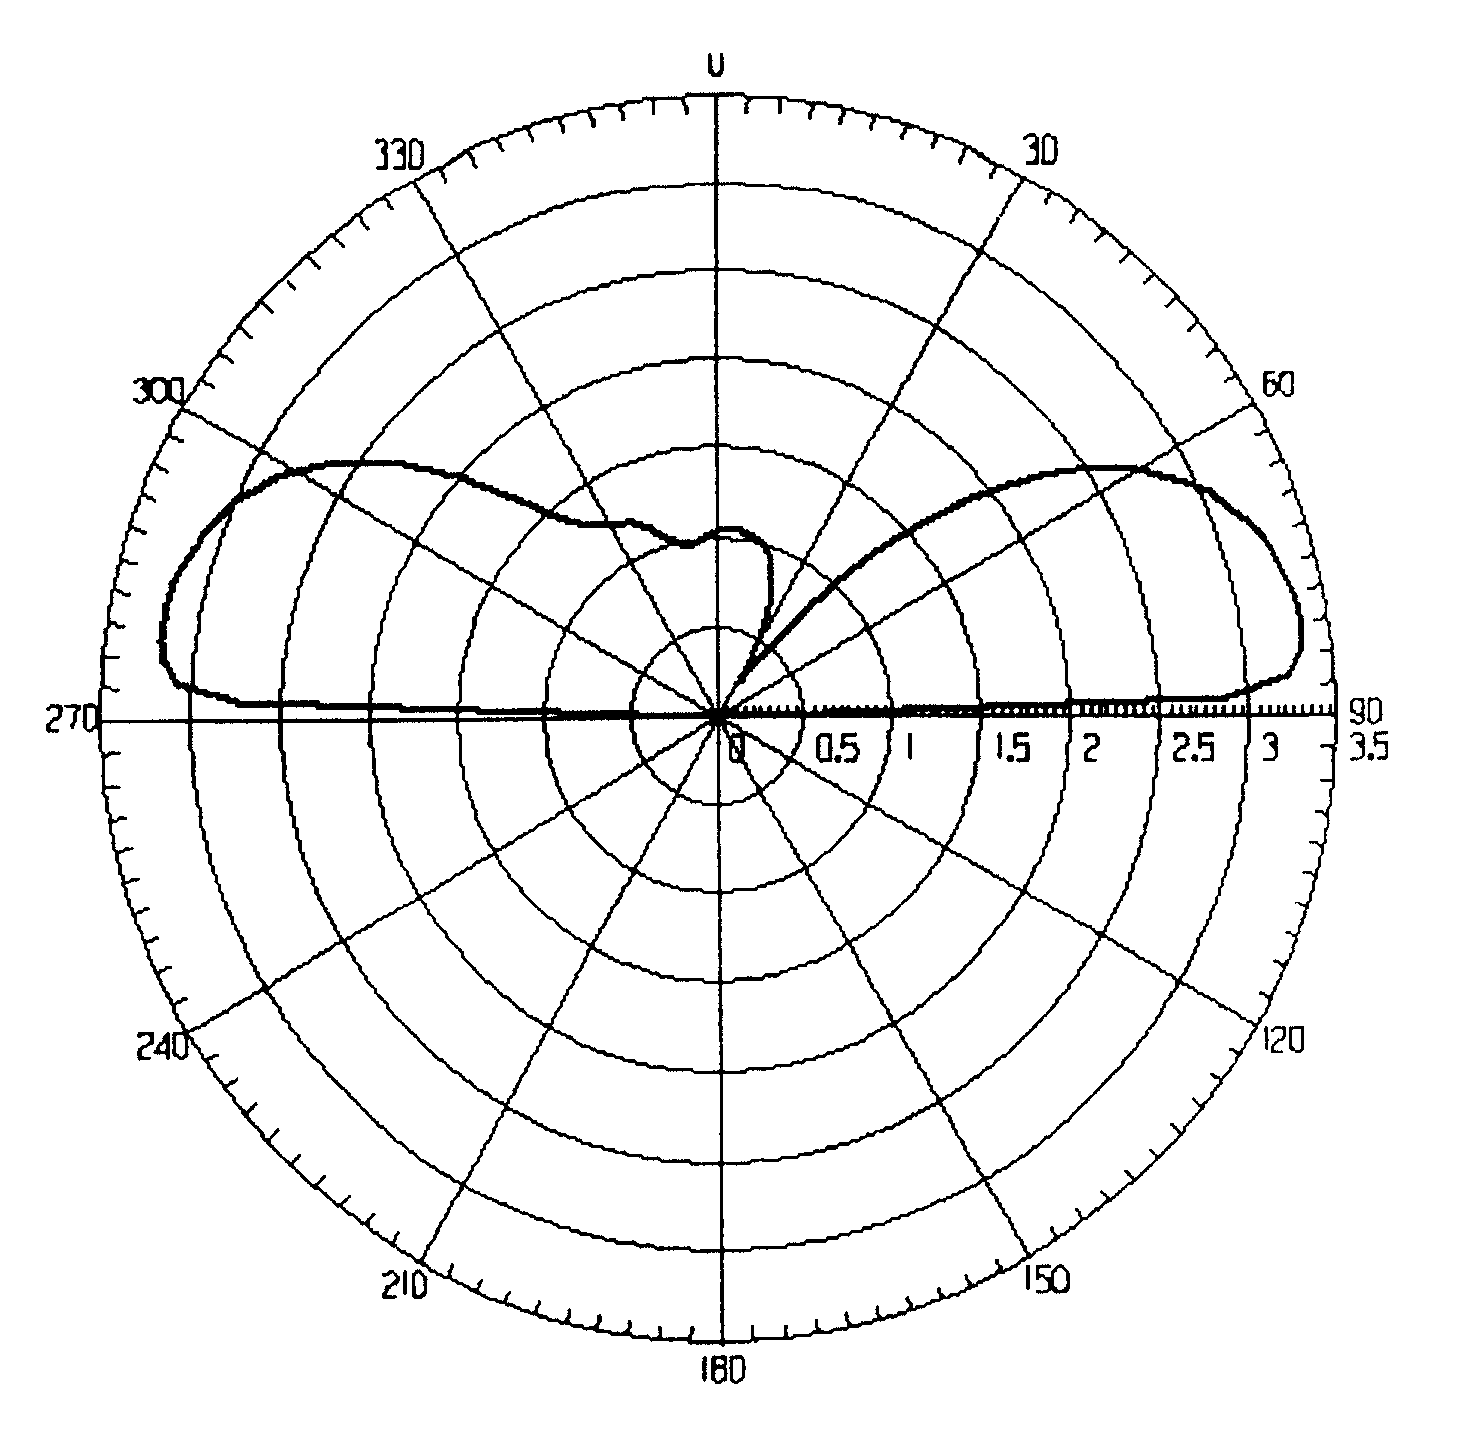 Method for assigning antenna directional pattern utilized to cover wireless signal in room